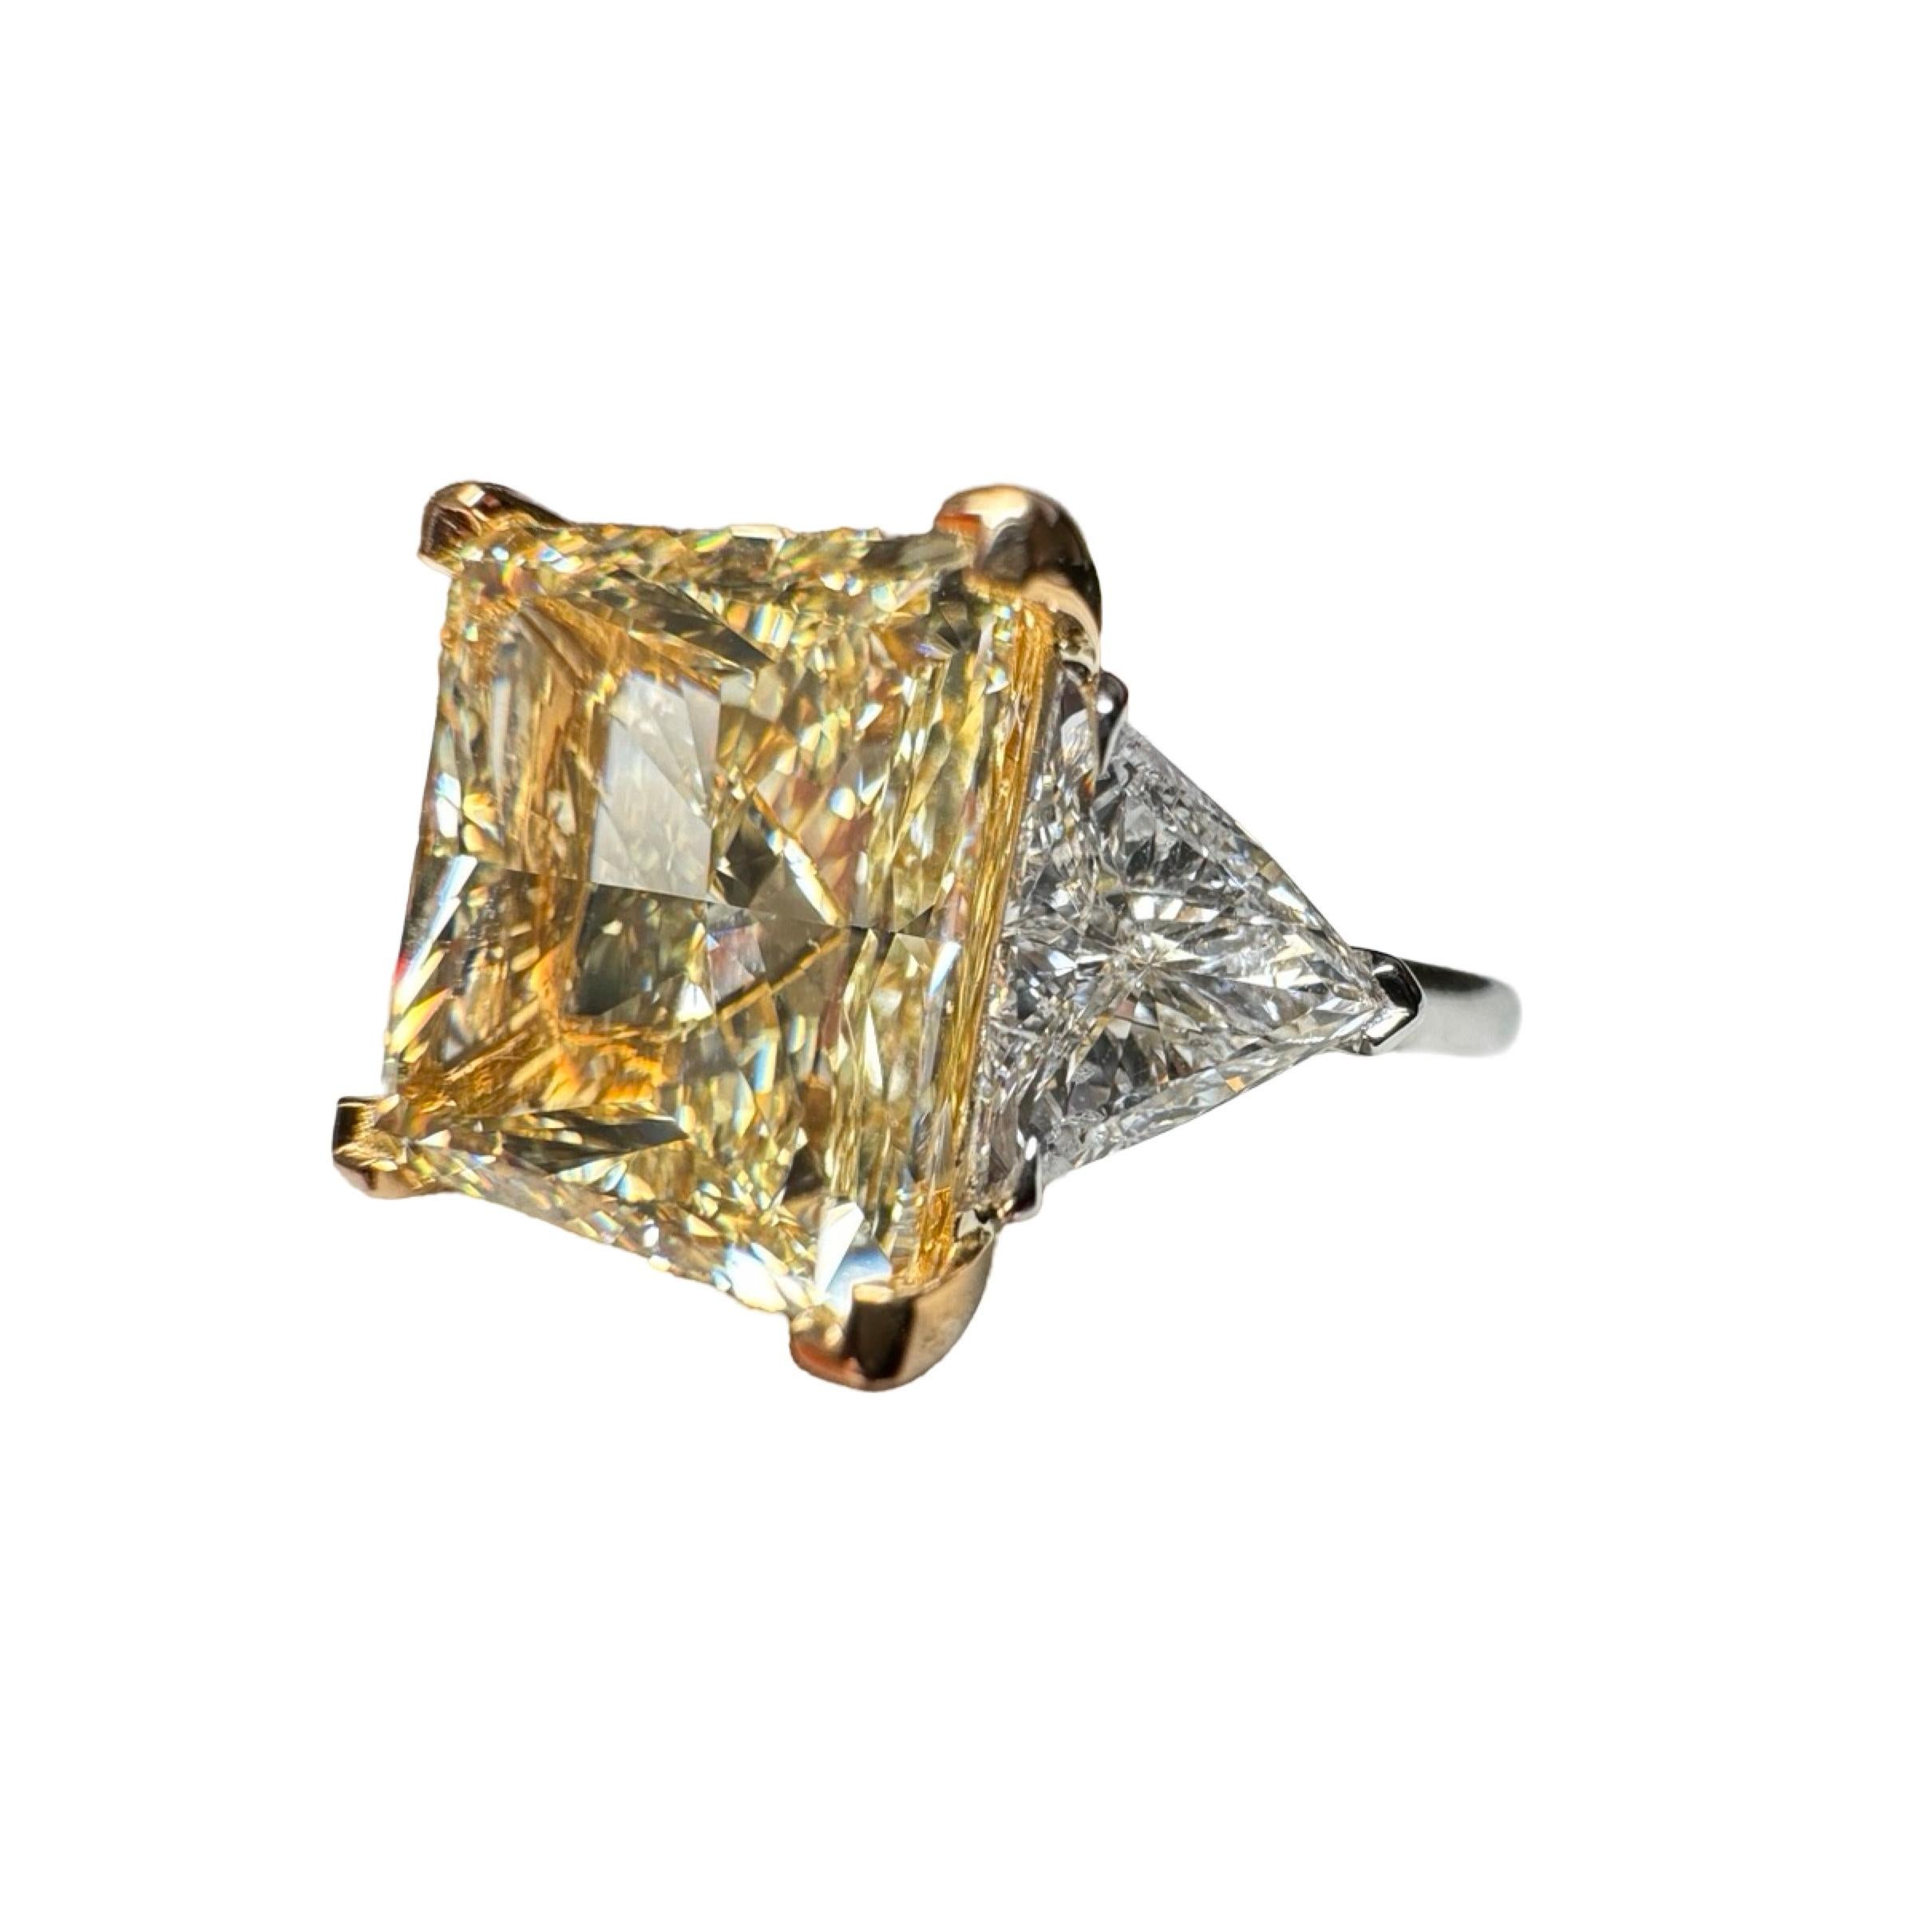 The Rarest Cut to find in a Yellow Diamond: The Princess Cut
A GIA Certified 6.91 Carat Princess Cut Yellow Diamond Three Stone Ring
with exceptional faceting. A very spready 60.5% Depth.
Center Diamond is graded by the GIA as Fancy Light Yellow,